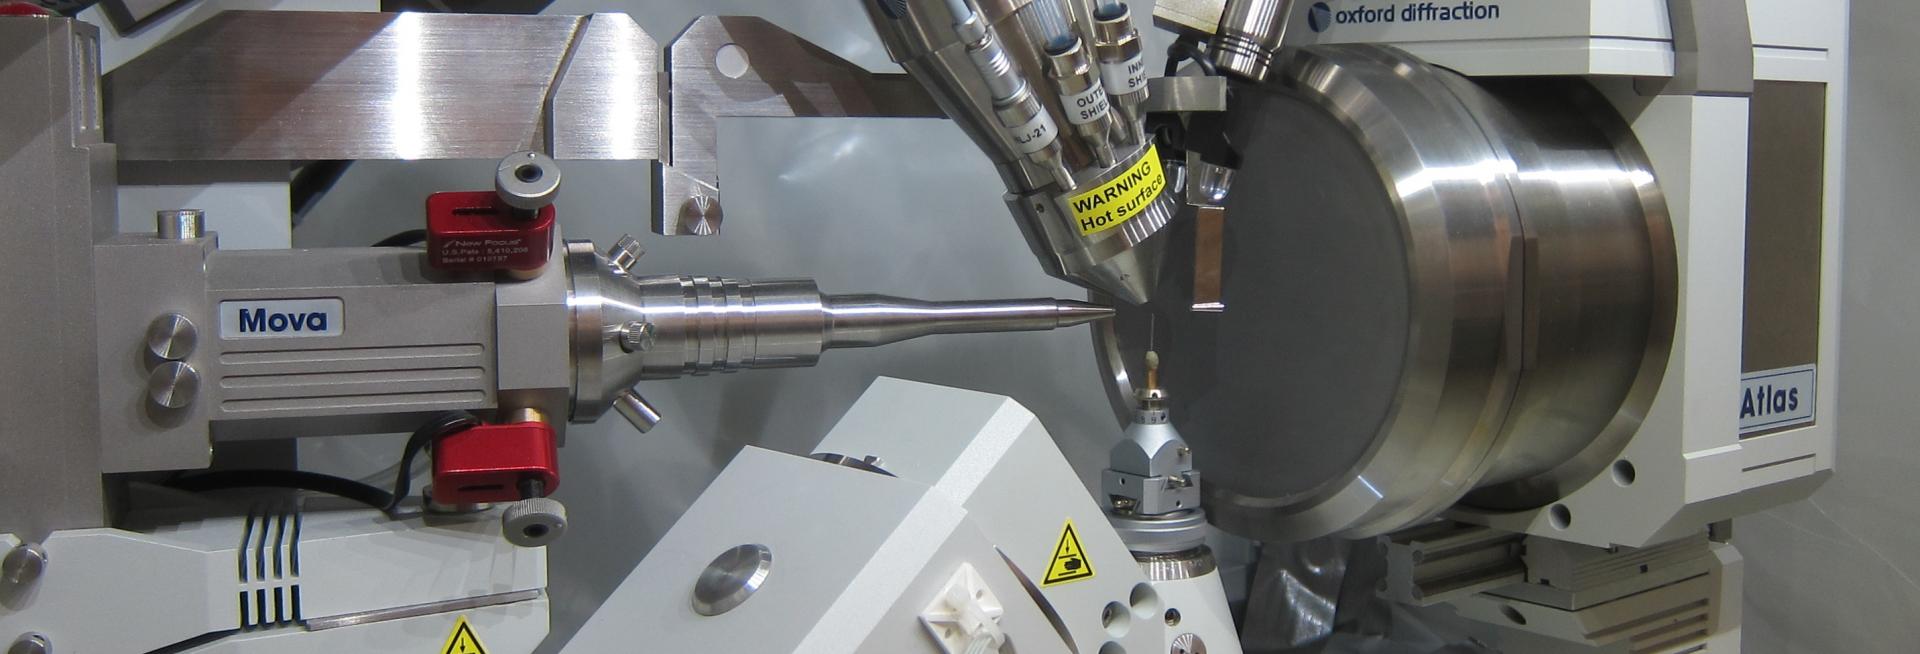 The Supernova single-crystal diffractometer in the Clarendon Laboratory